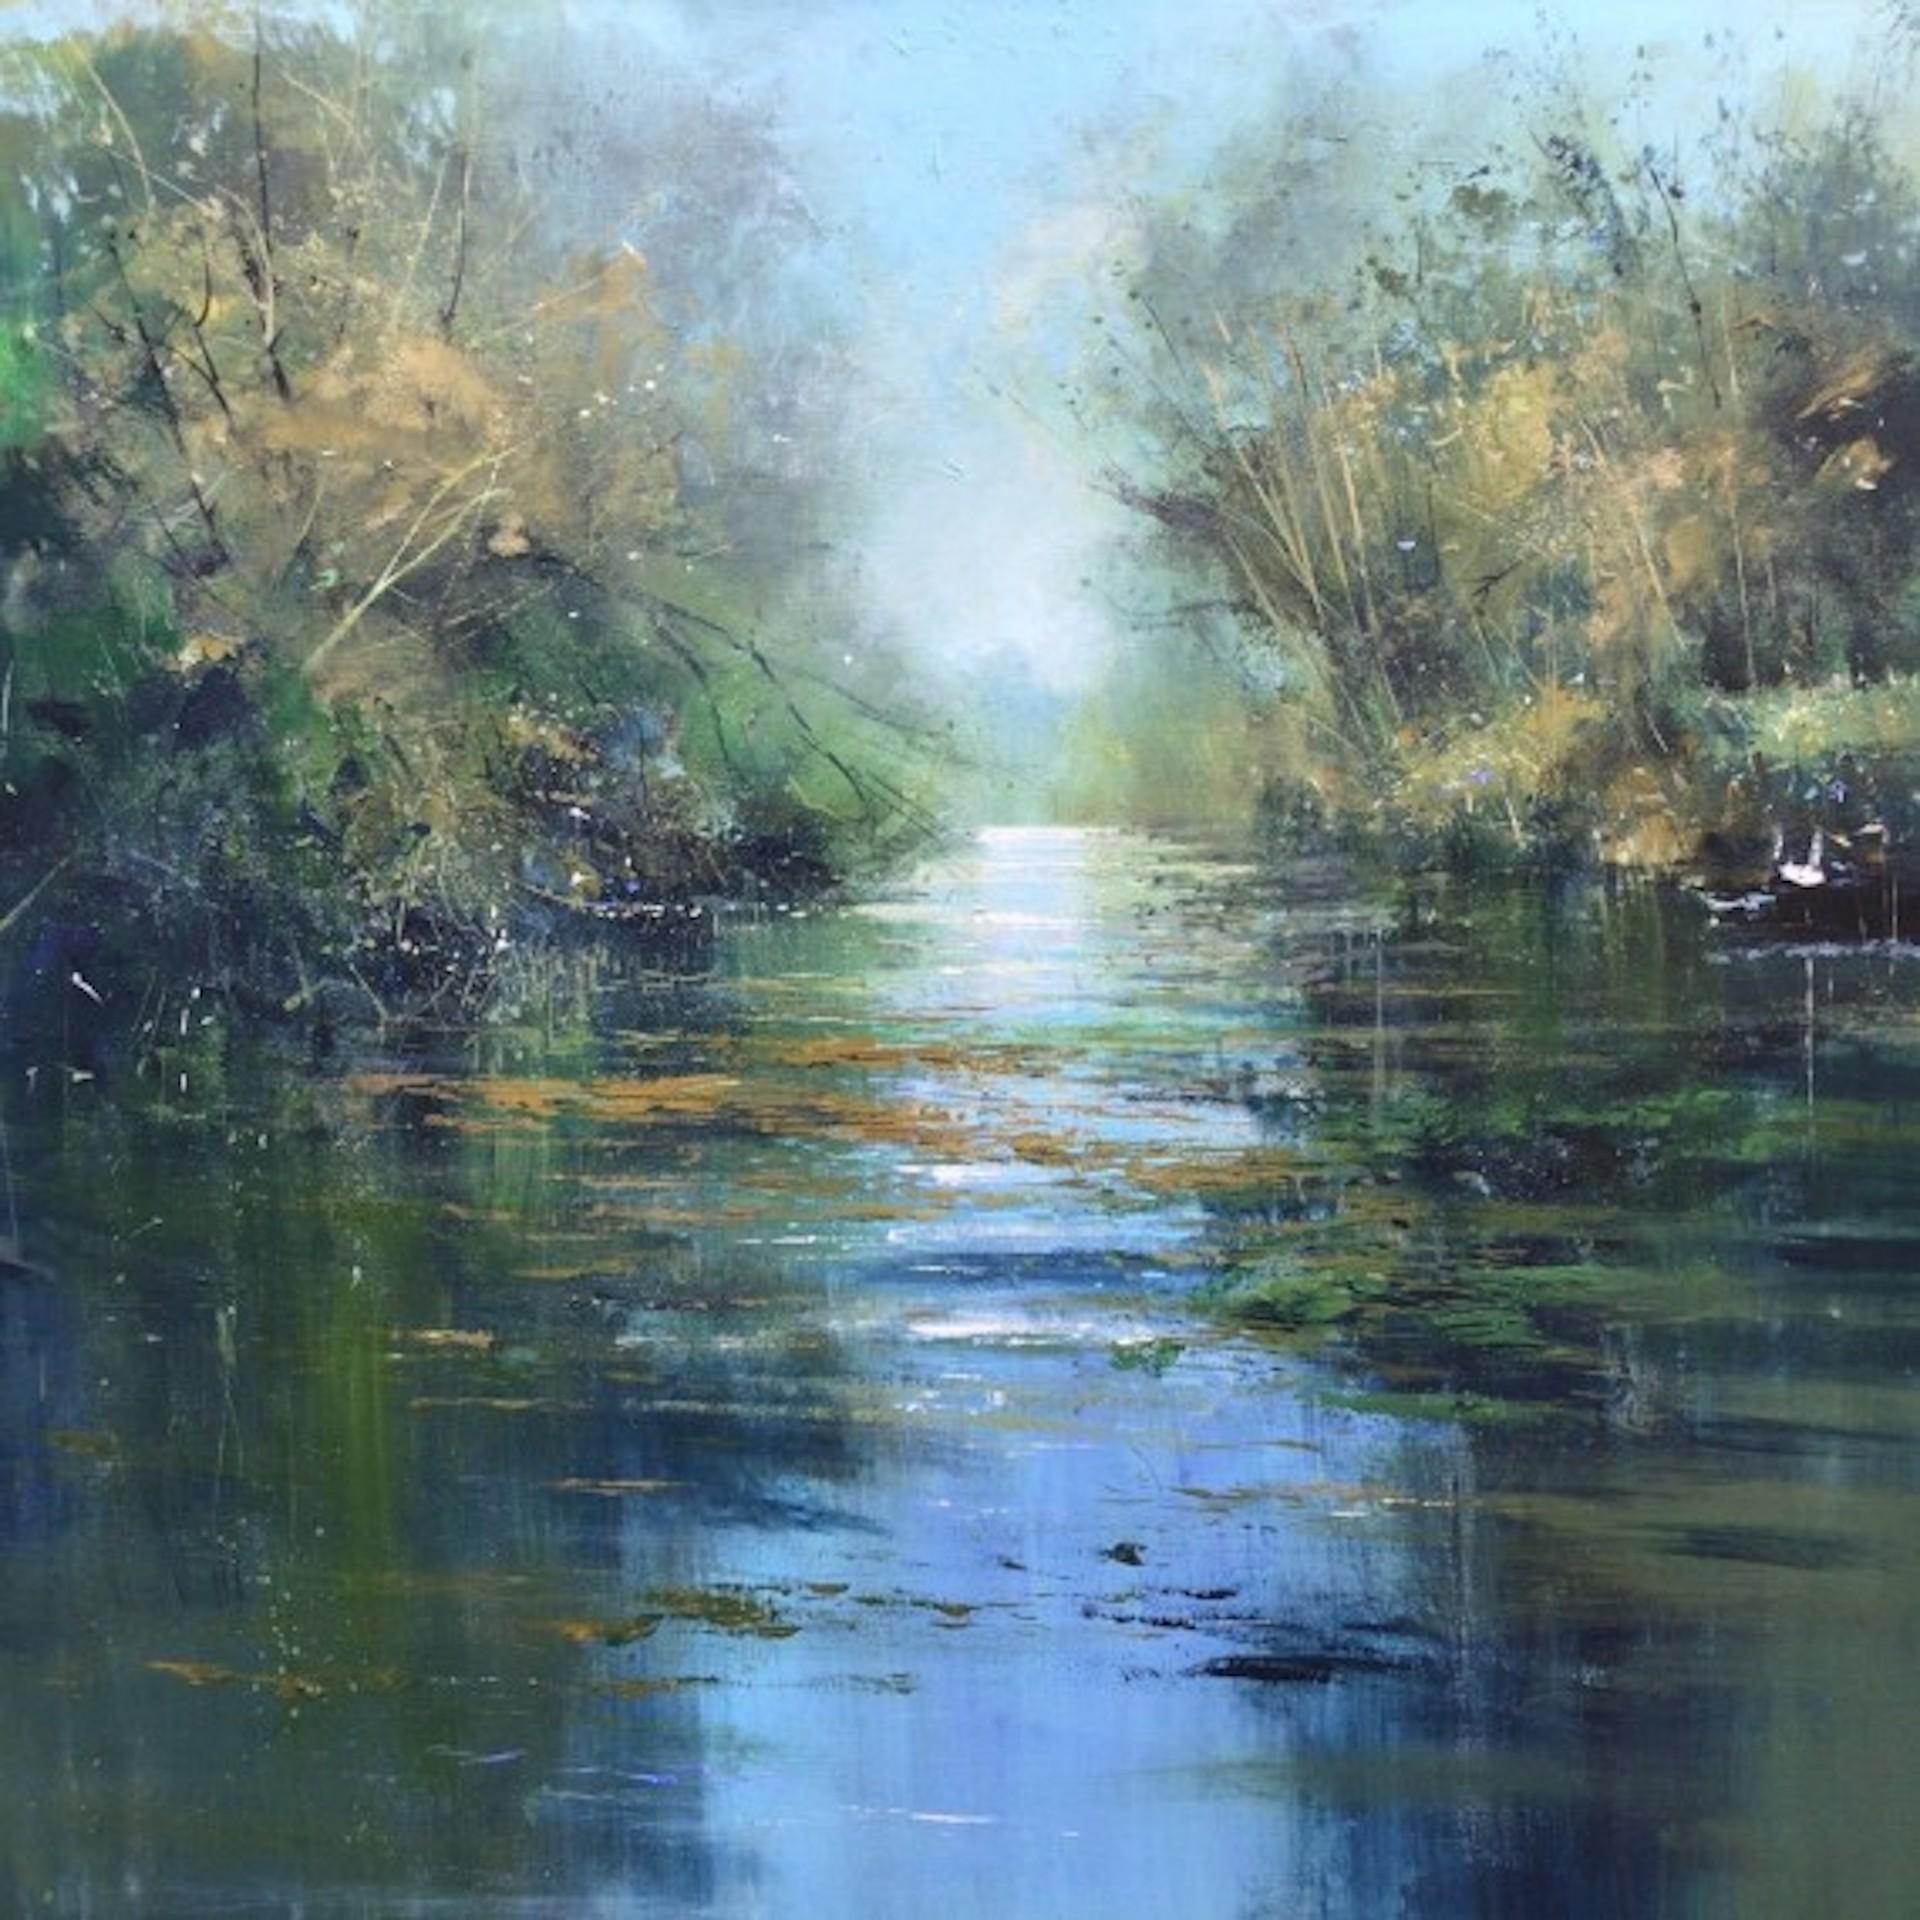 Still Water [2021]
Original
Landscape
Oil and Acrylic
Canvas Size: H:80 cm x W:80 cm x D:3.5cm
Sold Unframed
Please note that insitu images are purely an indication of how a piece may look

'Still Water' by Jonathan Trim has the beautiful atmosphere